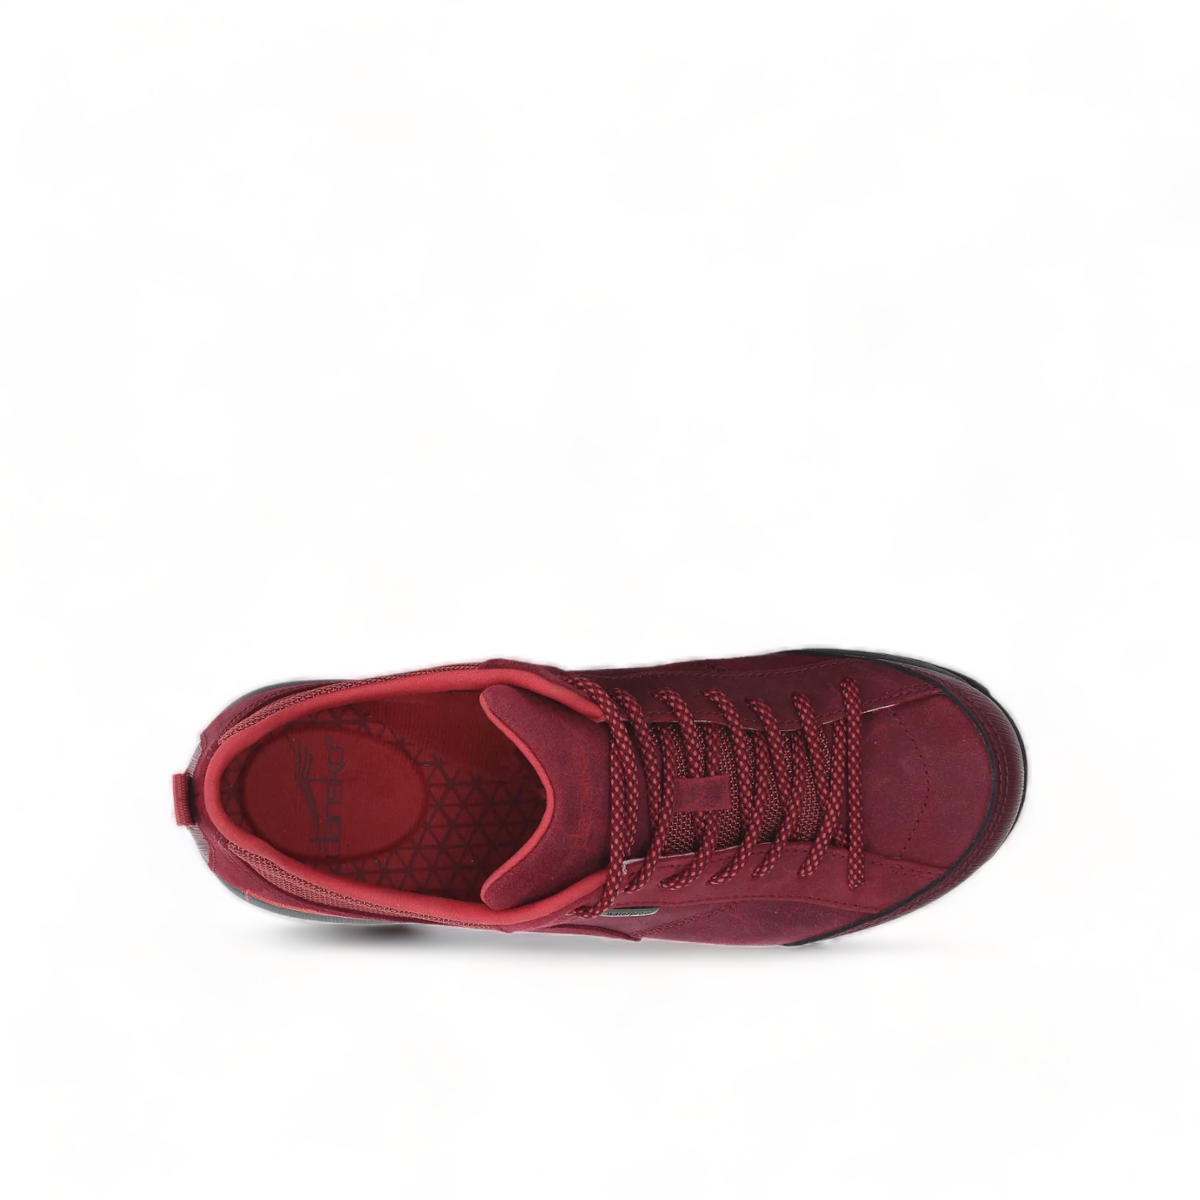 Paisley  Suede Sneaker Red Burnished